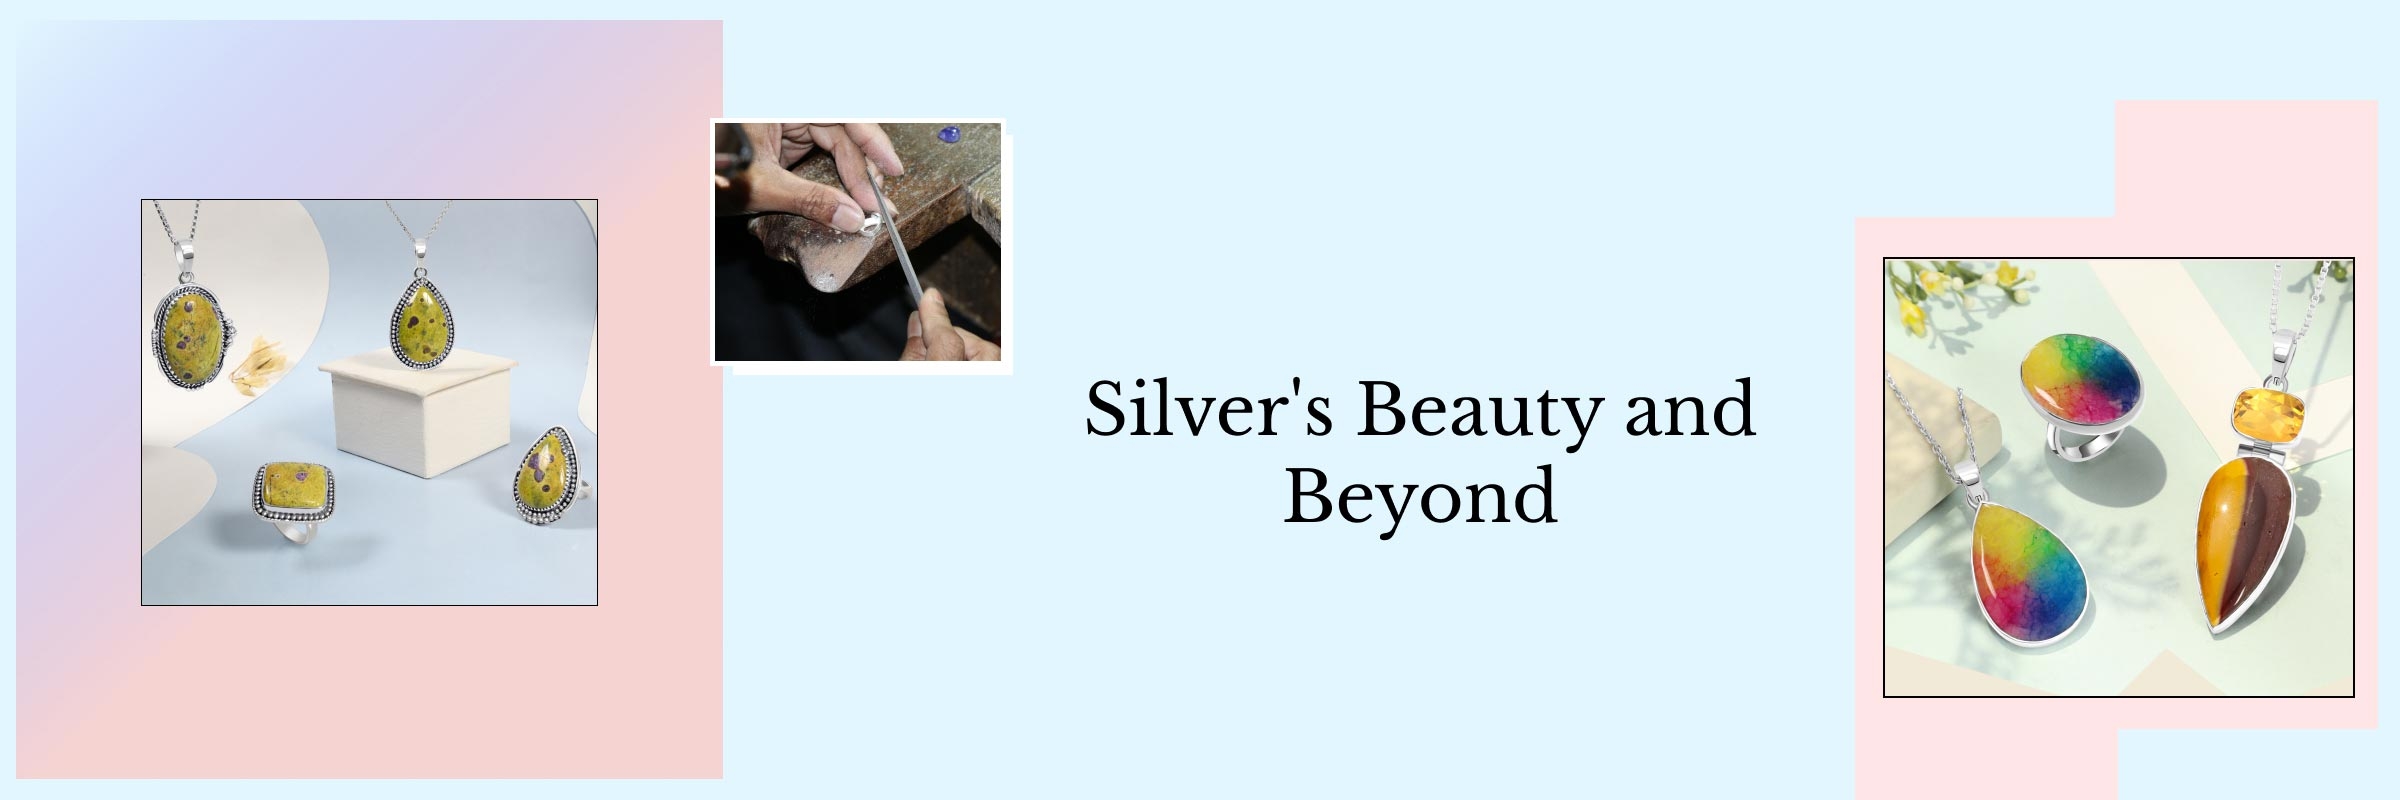 Benefits of Silver